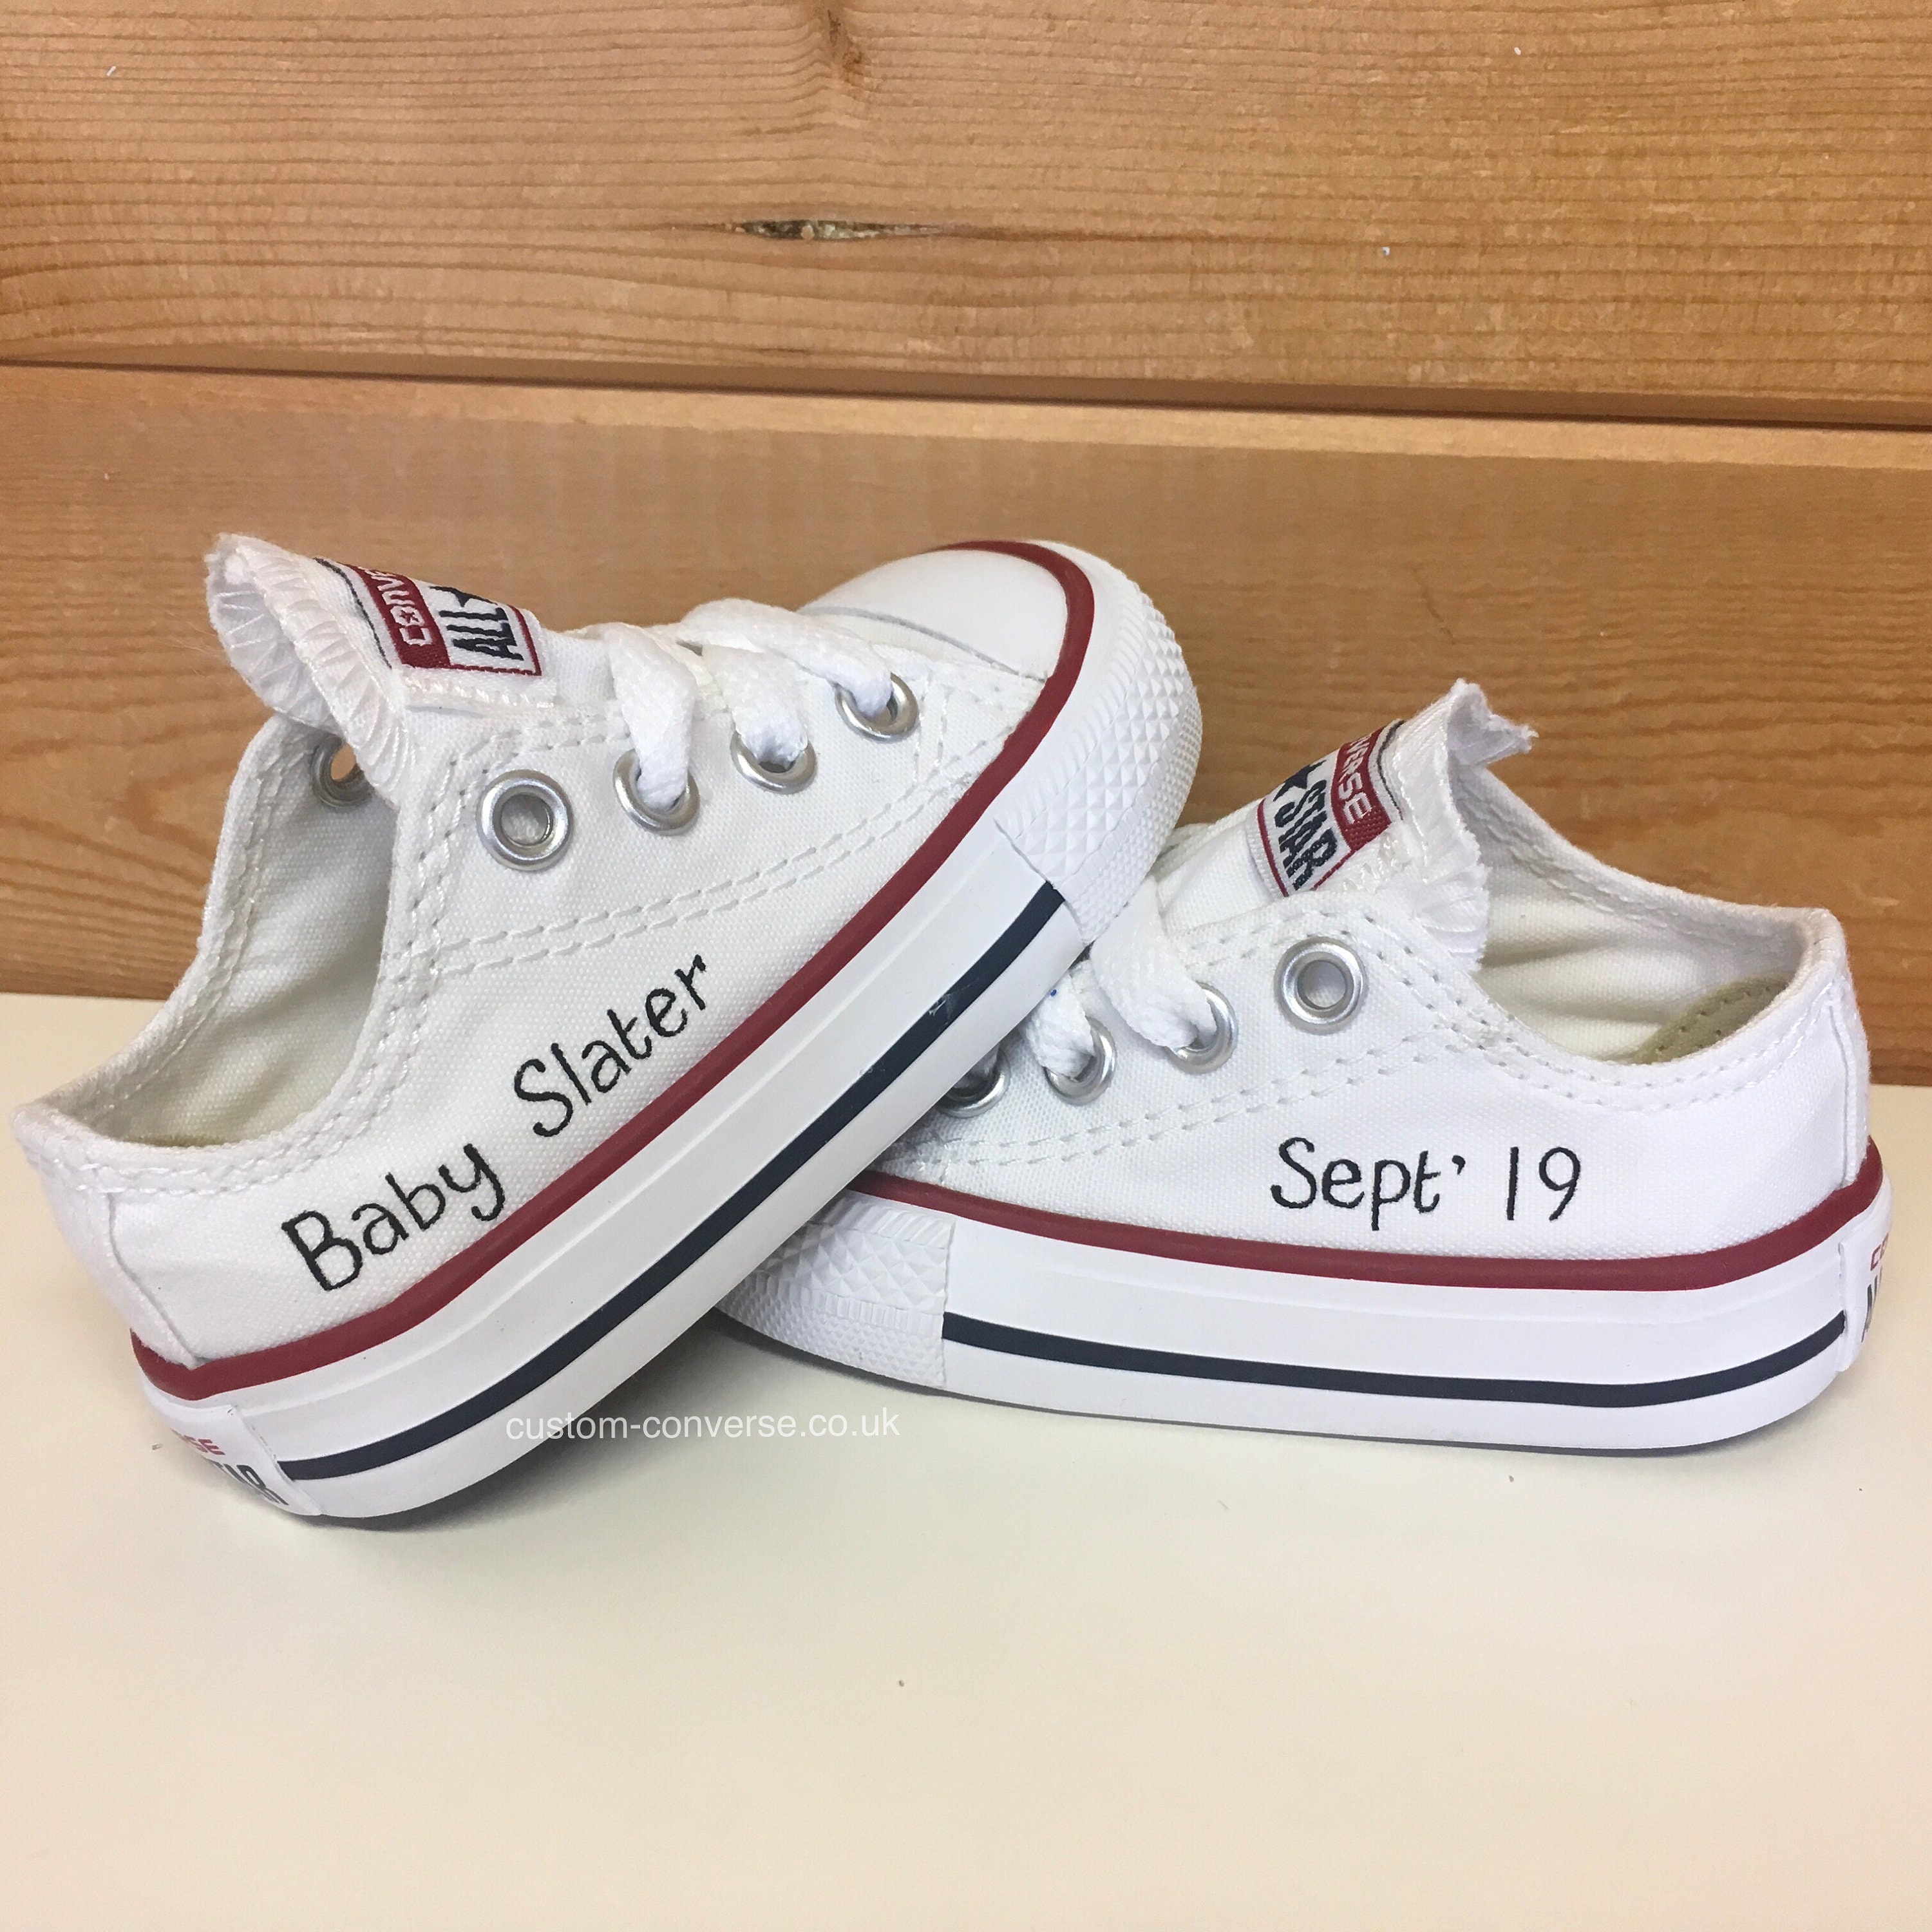 hastighed mikrobølgeovn Skrive ud Kids Personalised Hand Painted Converse Trainers White Low - Etsy